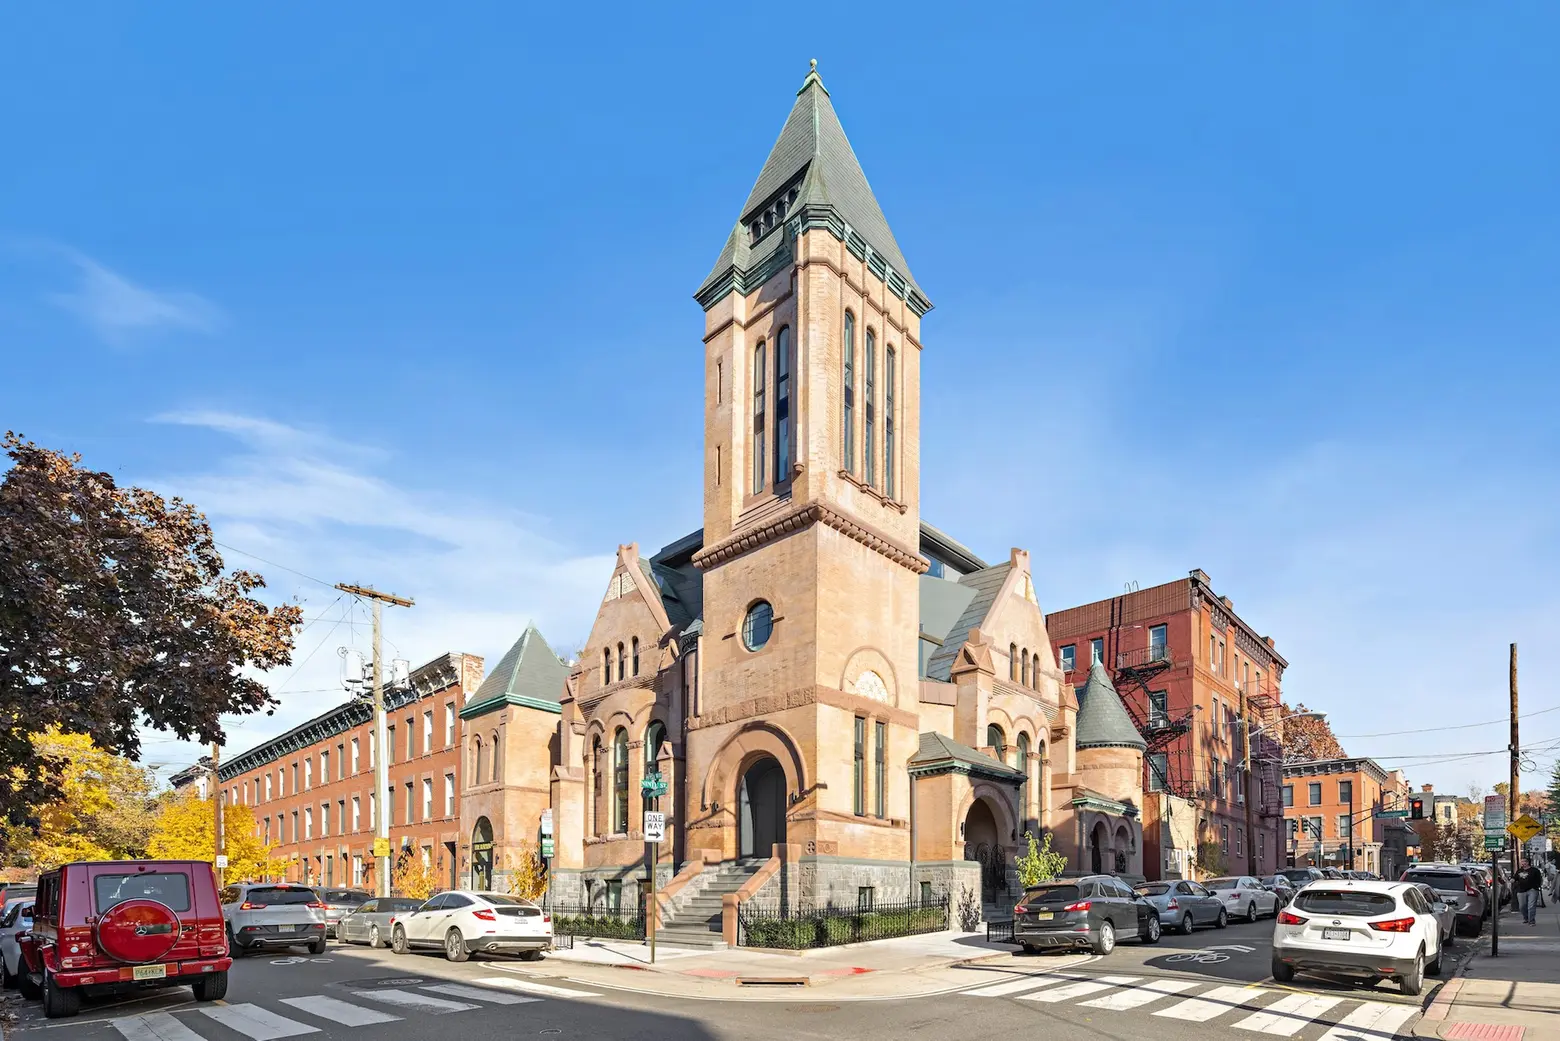 For $3M, live in the original bell tower of this historic Hoboken church